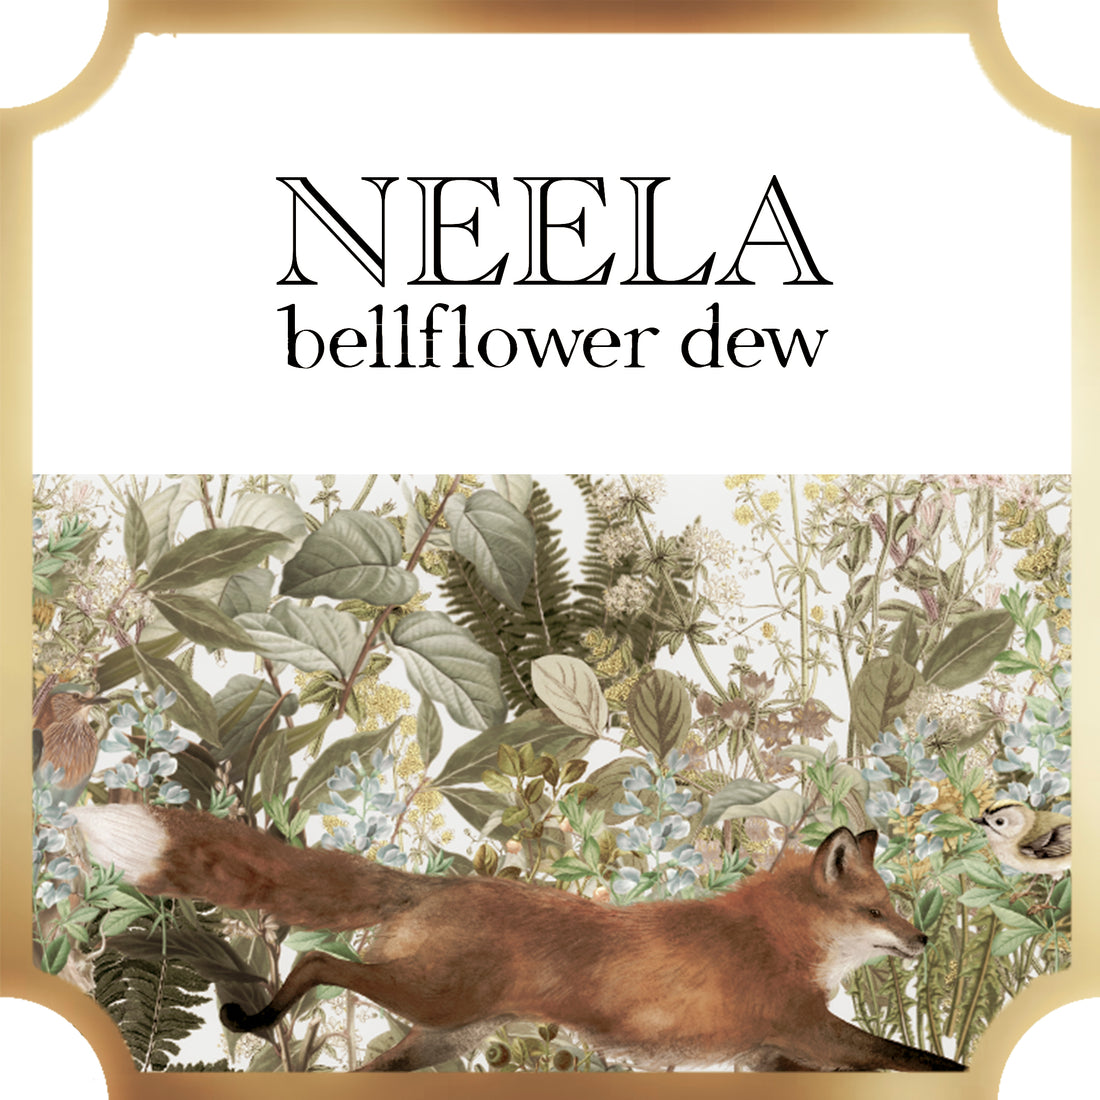  neela collection a pleasant thought